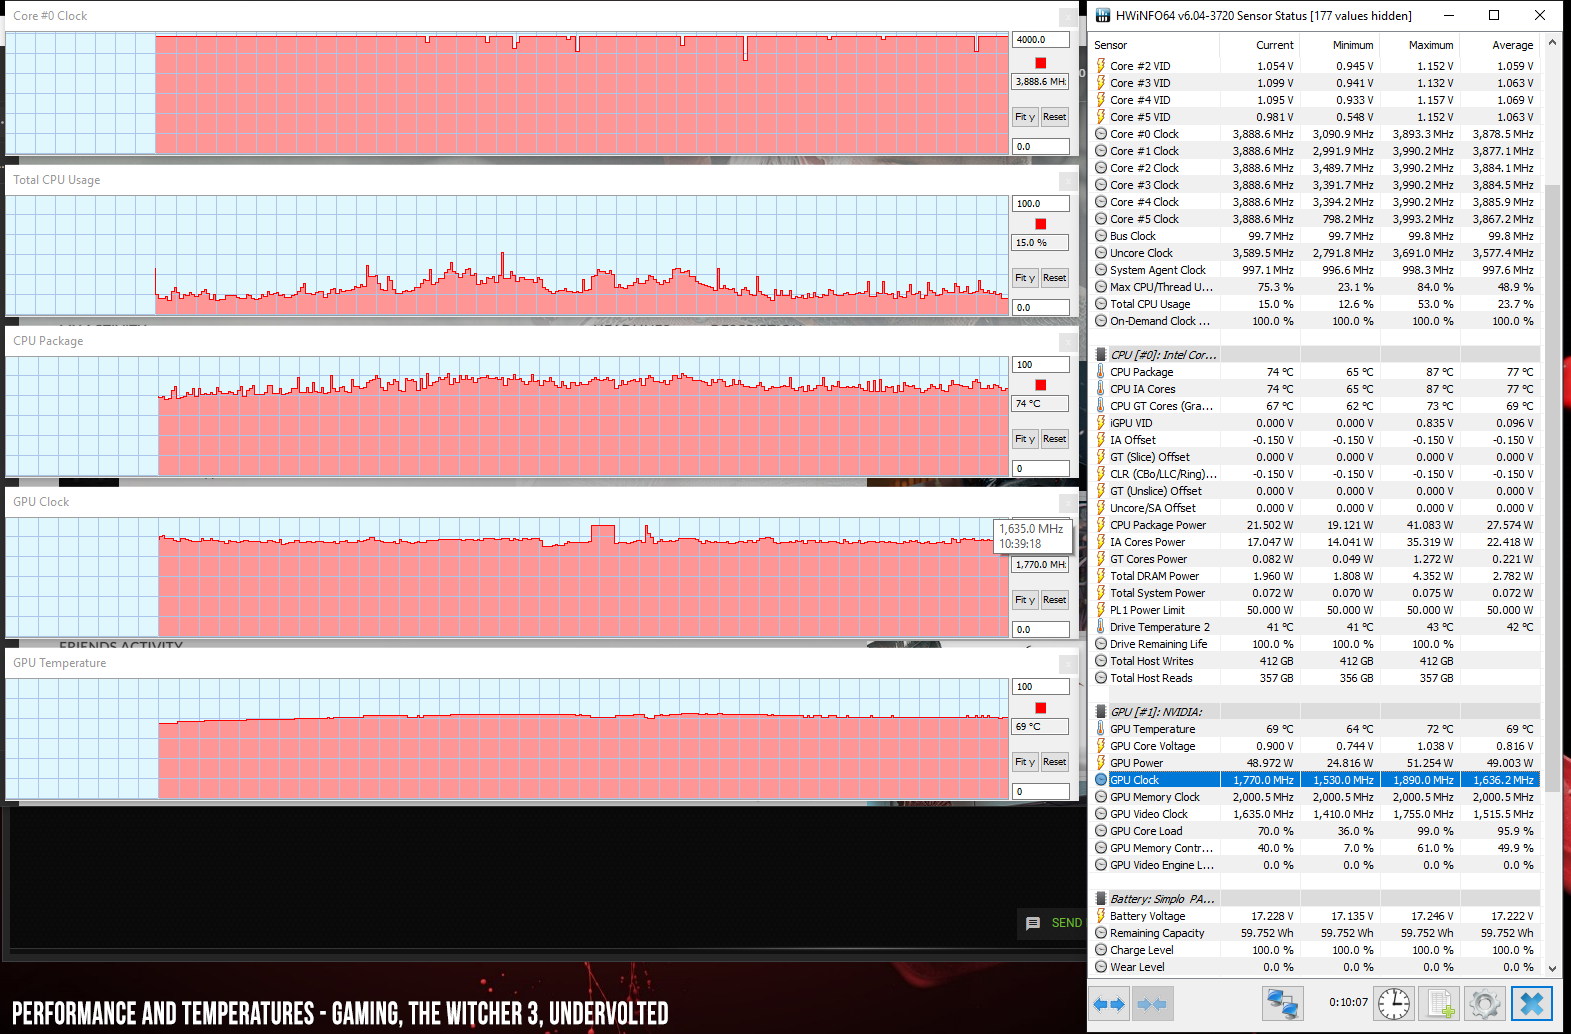 perf temps gaming witcher3 undervolted 2